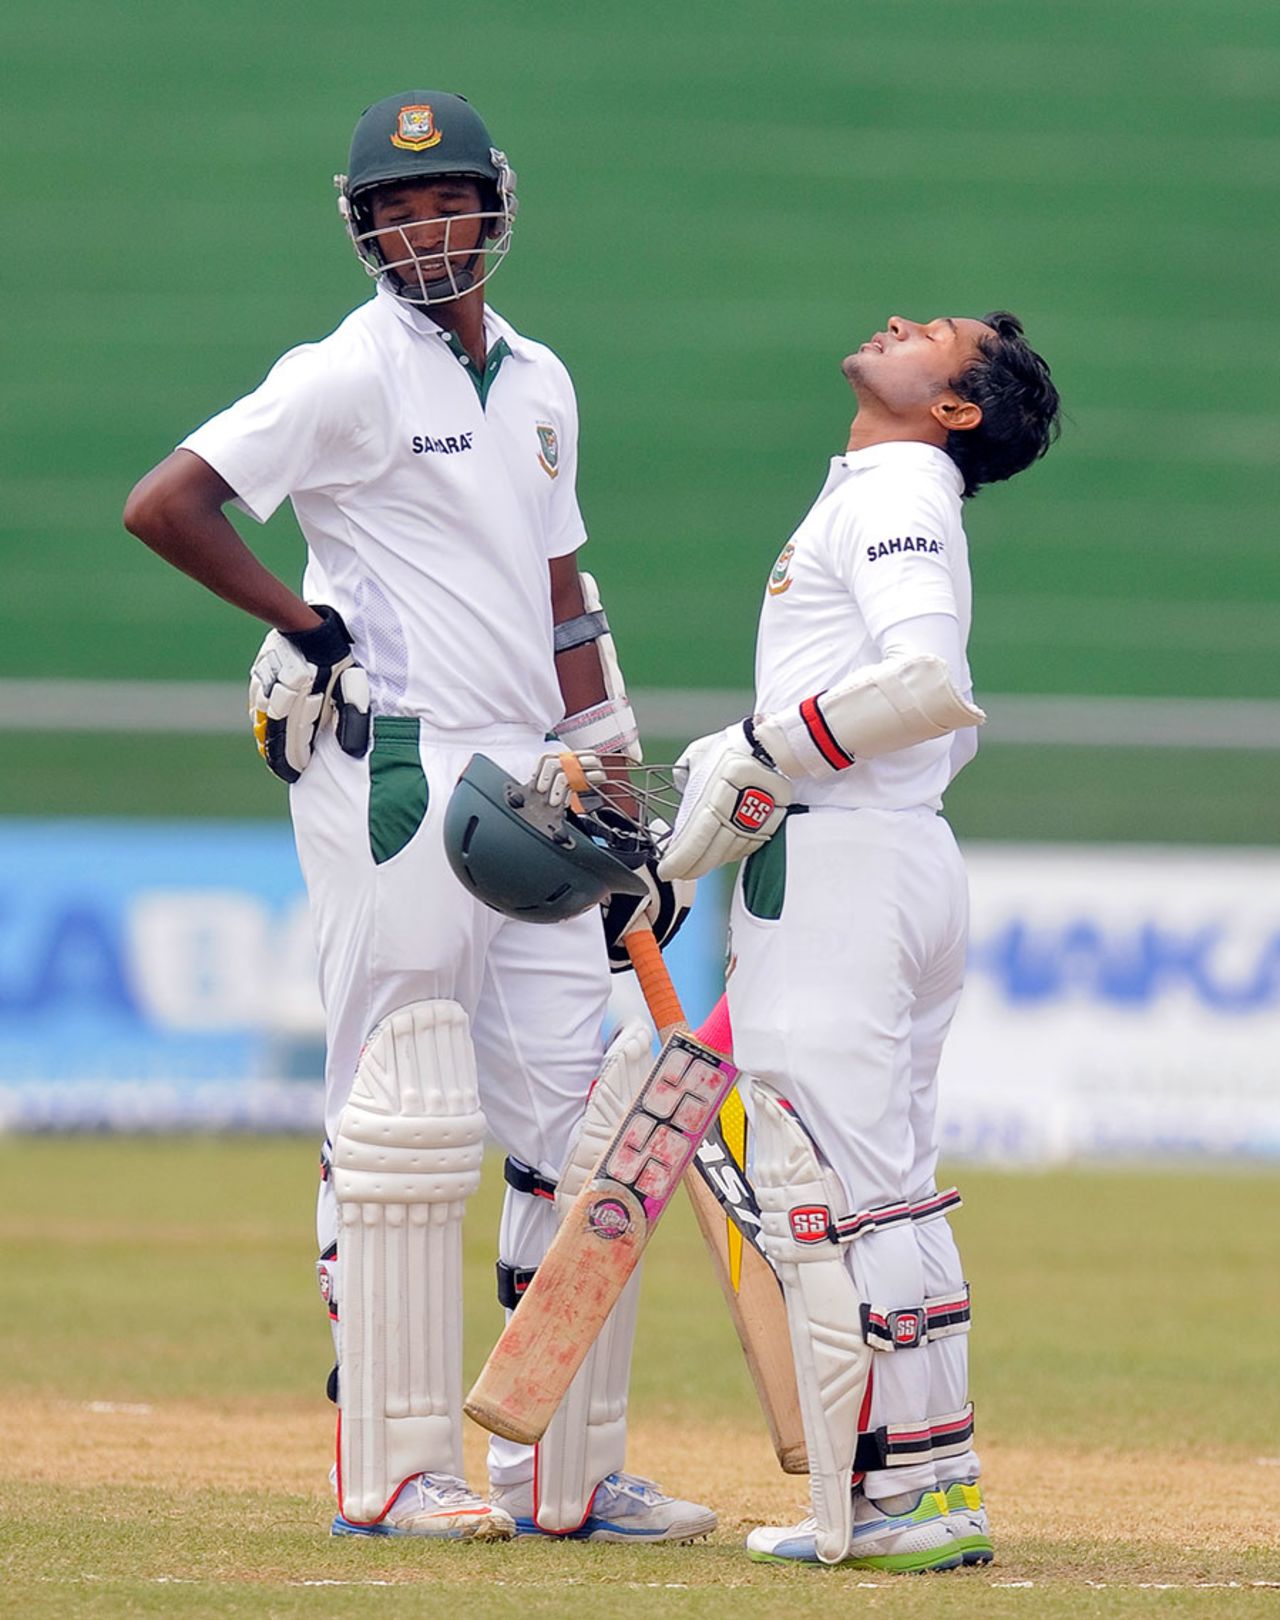 Mushfiqur Rahim looks up at the sky after completing his century, West Indies v Bangladesh, 1st Test, St. Vincent, 5th day, September 9, 2014